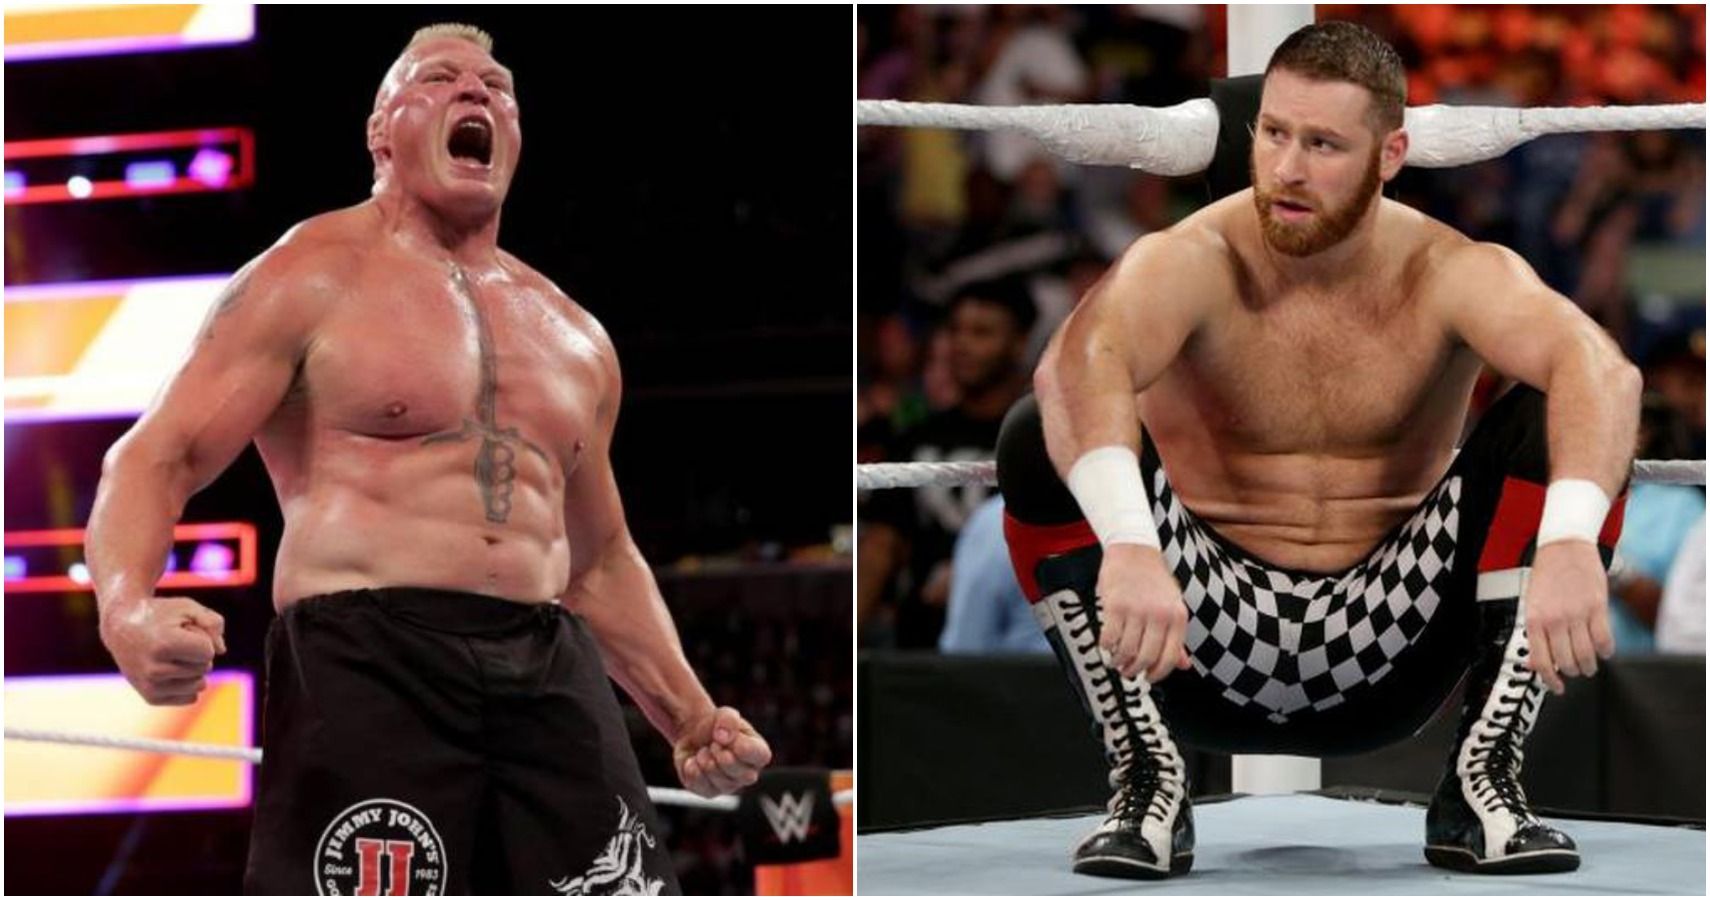 5 Current Overrated Male Superstars (& 5 That Are Underrated)